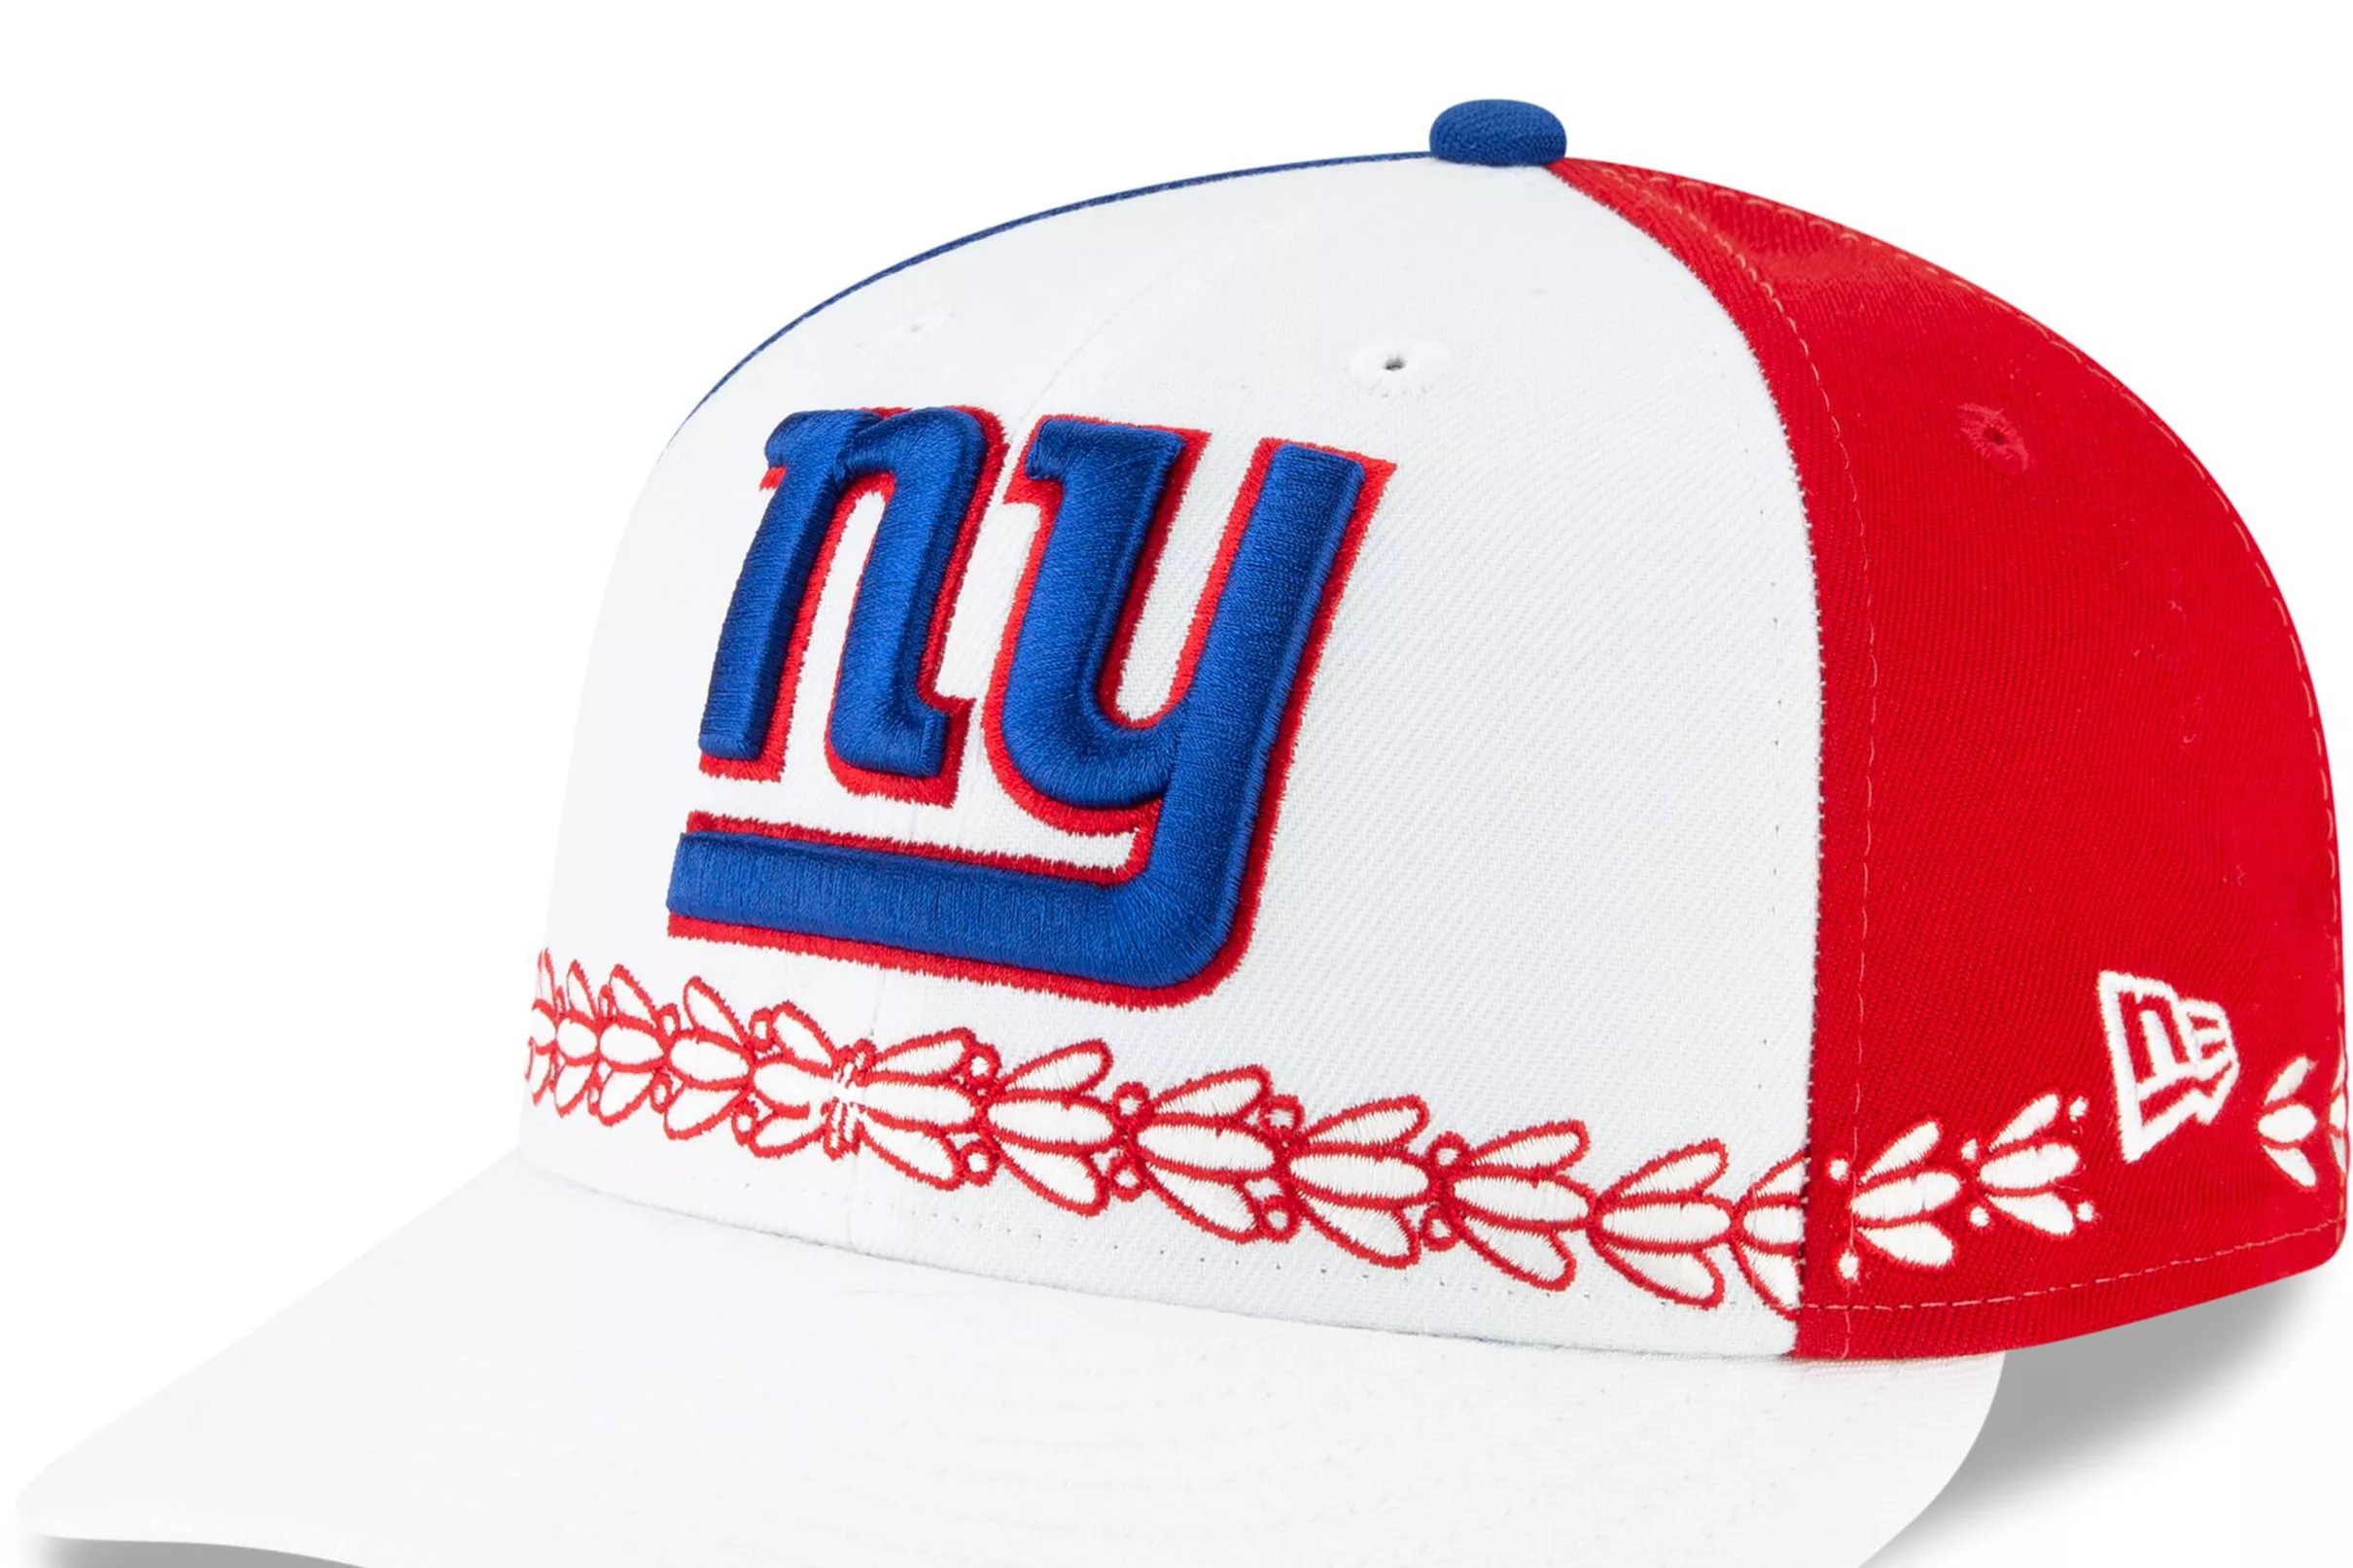 New York Giants Draft hats are here